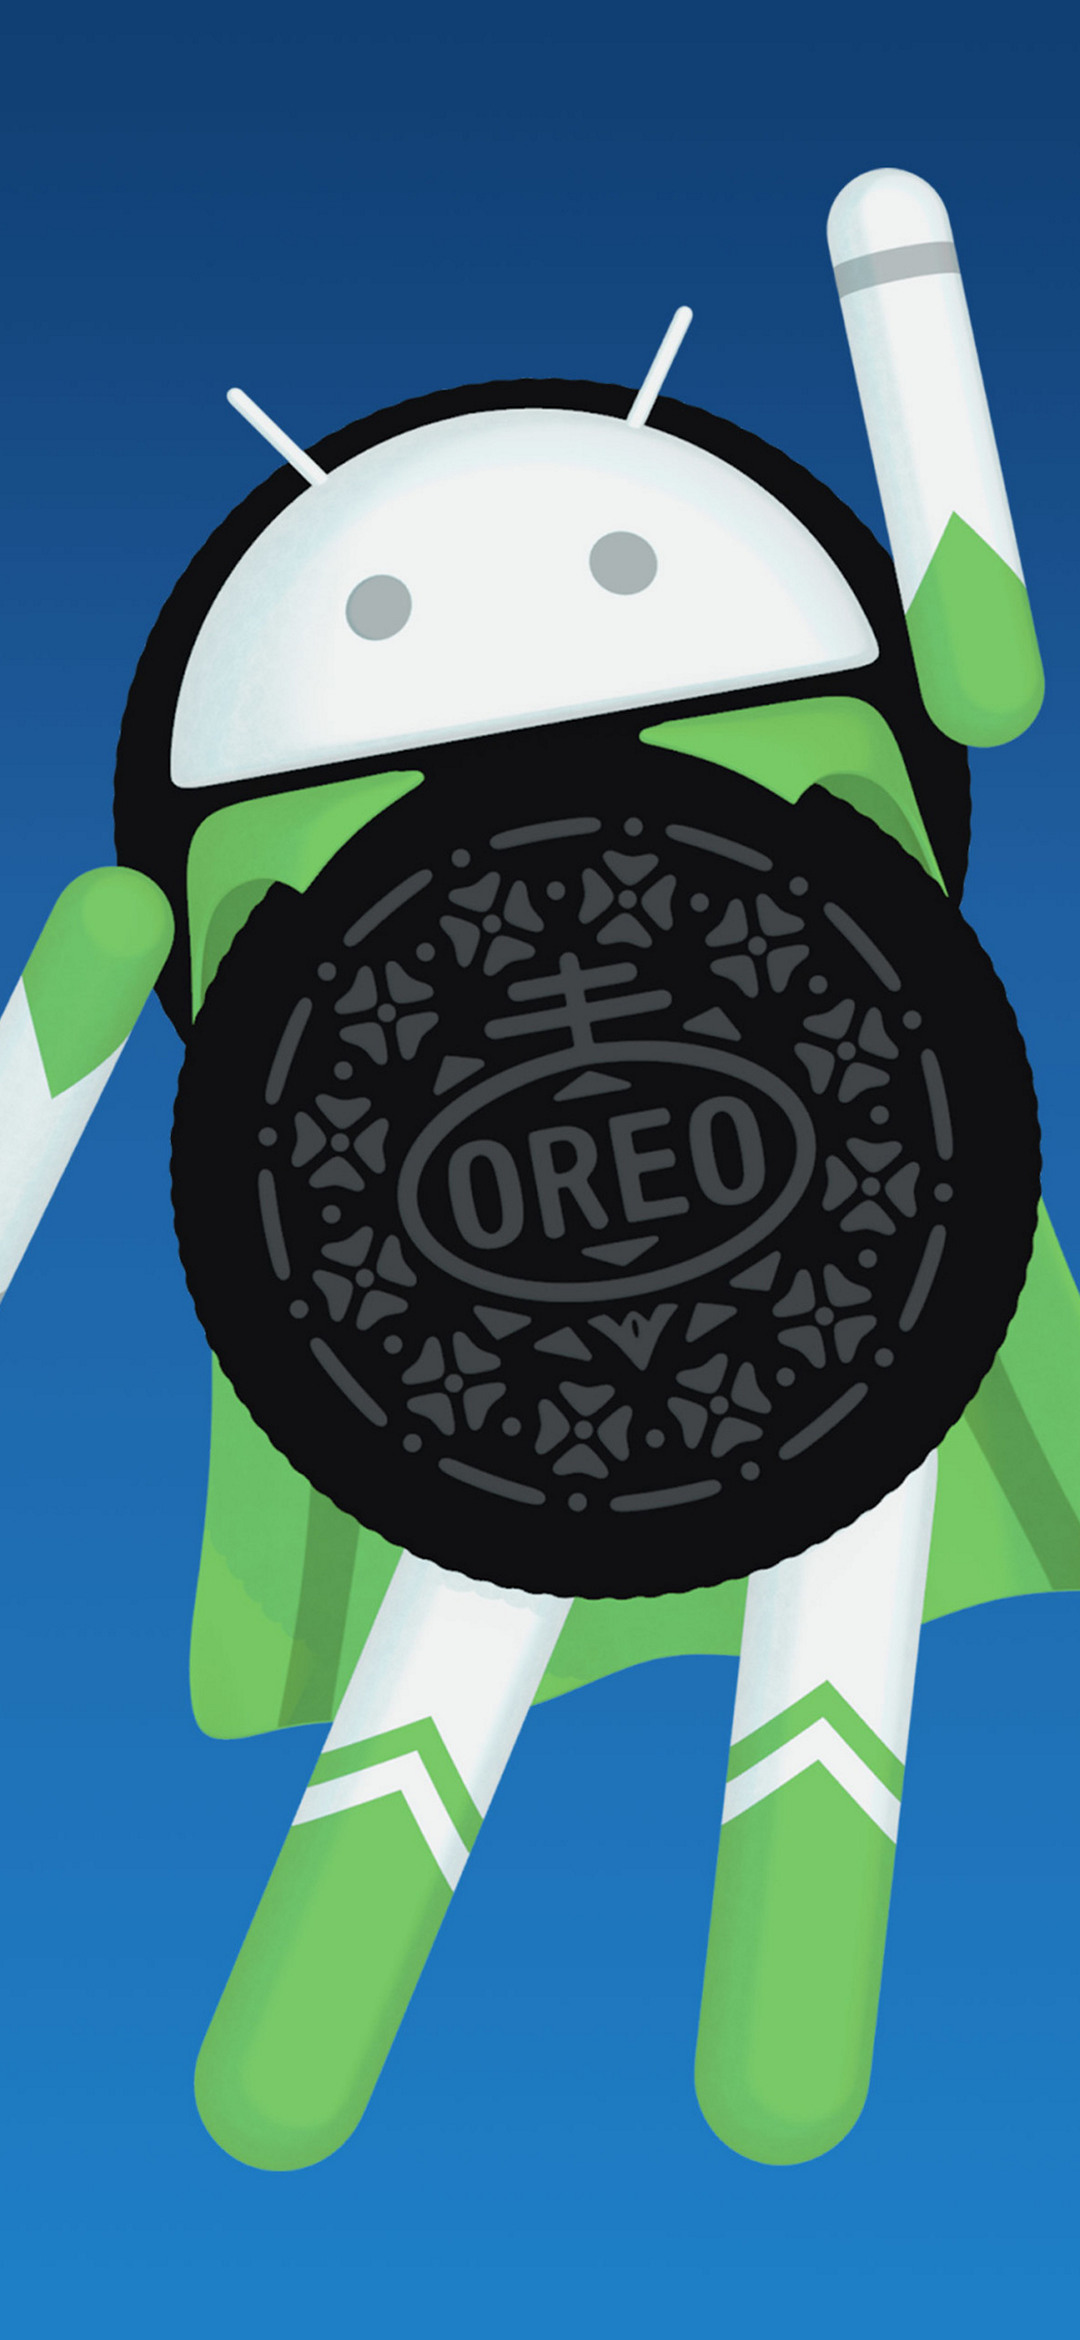 Android oreo RedMagic 5 Android 壁紙・待ち受け